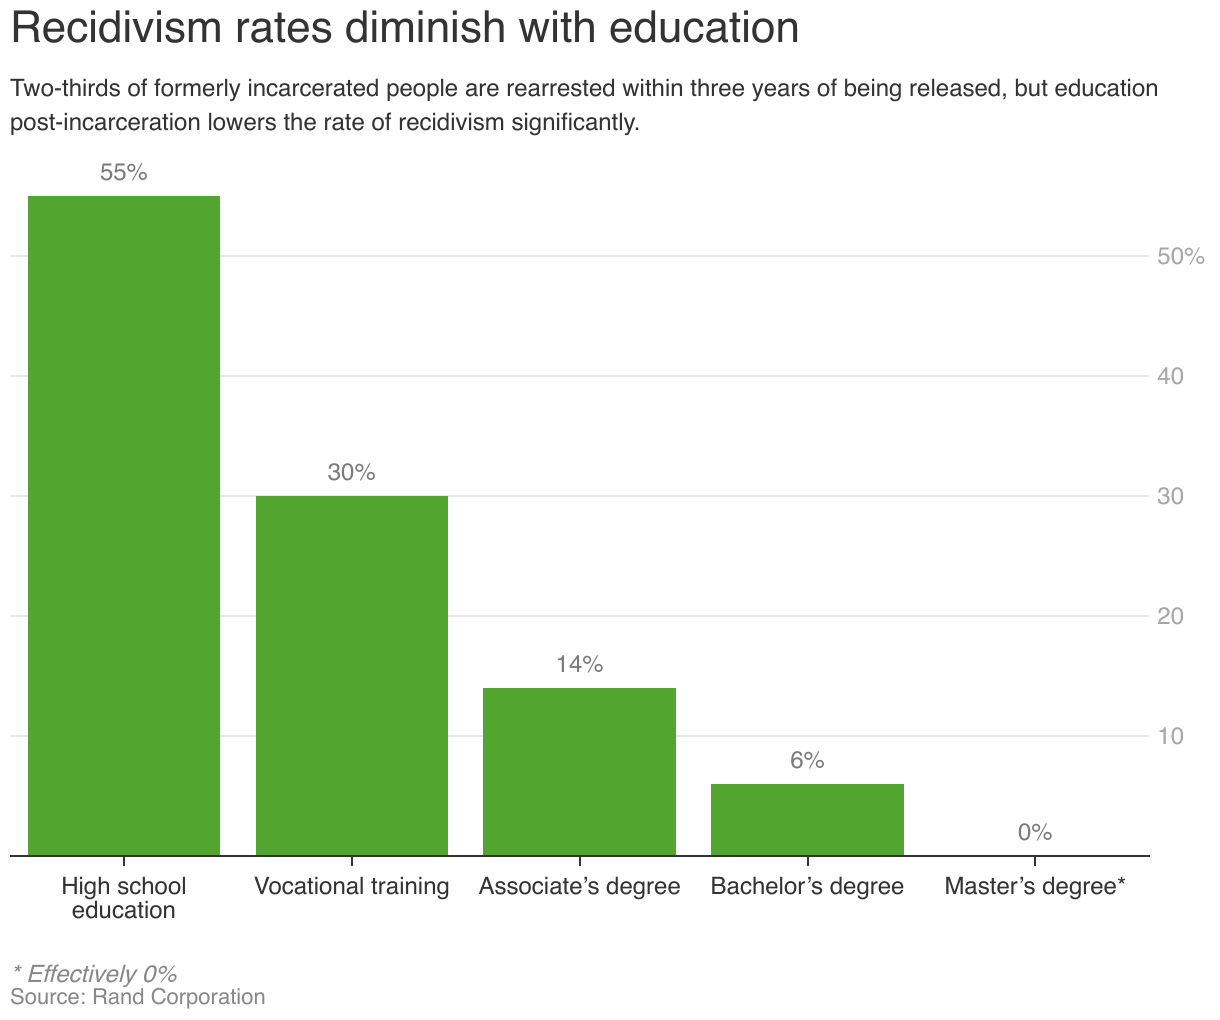 Data shows that vocational training brings recidivism down to 30%, a bachelor's degree brings it to 6%, and a master's degree brings recidivism to effectively 0%